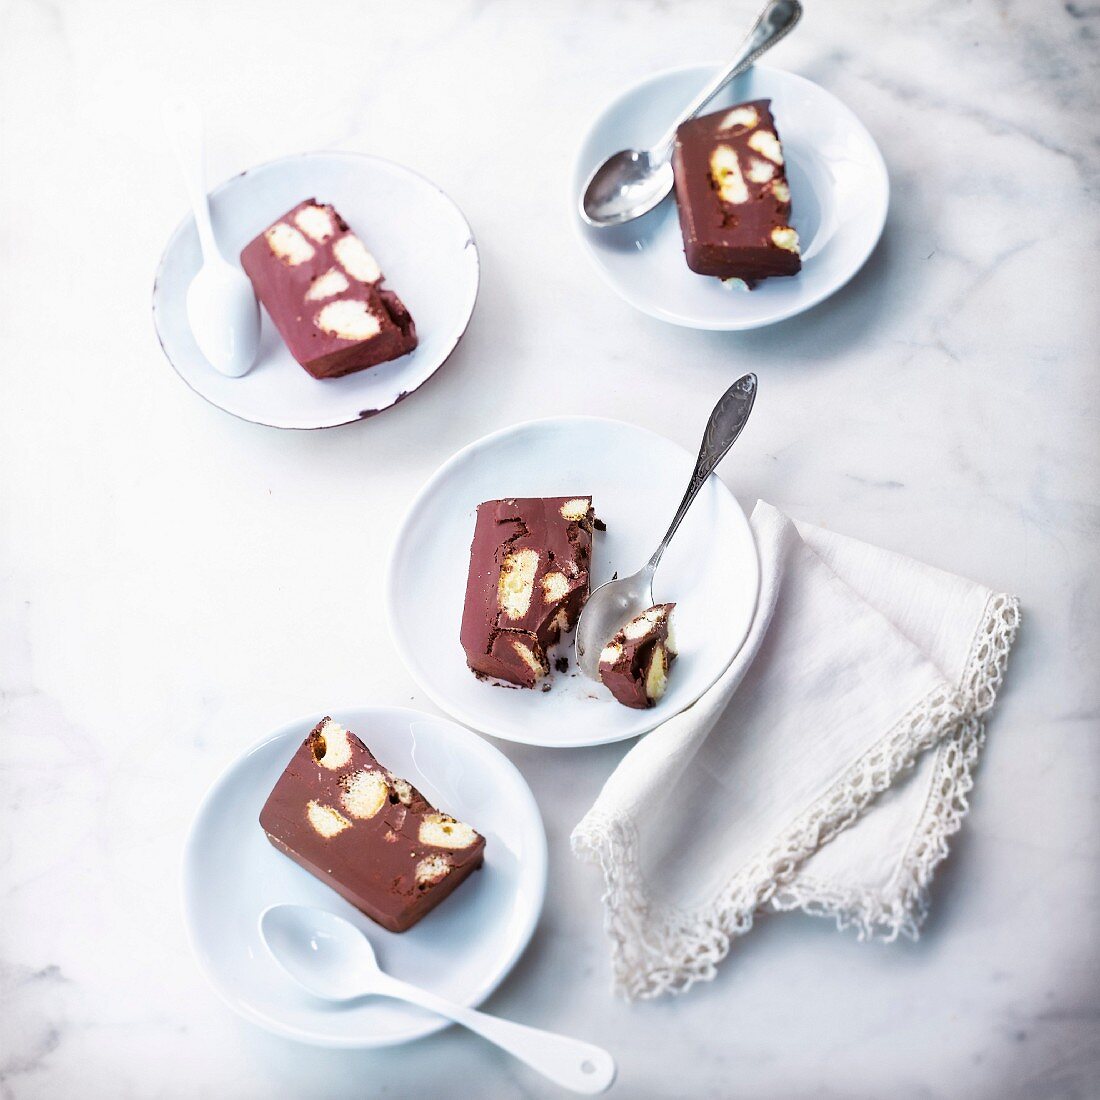 Chocolate terrine with biscuits